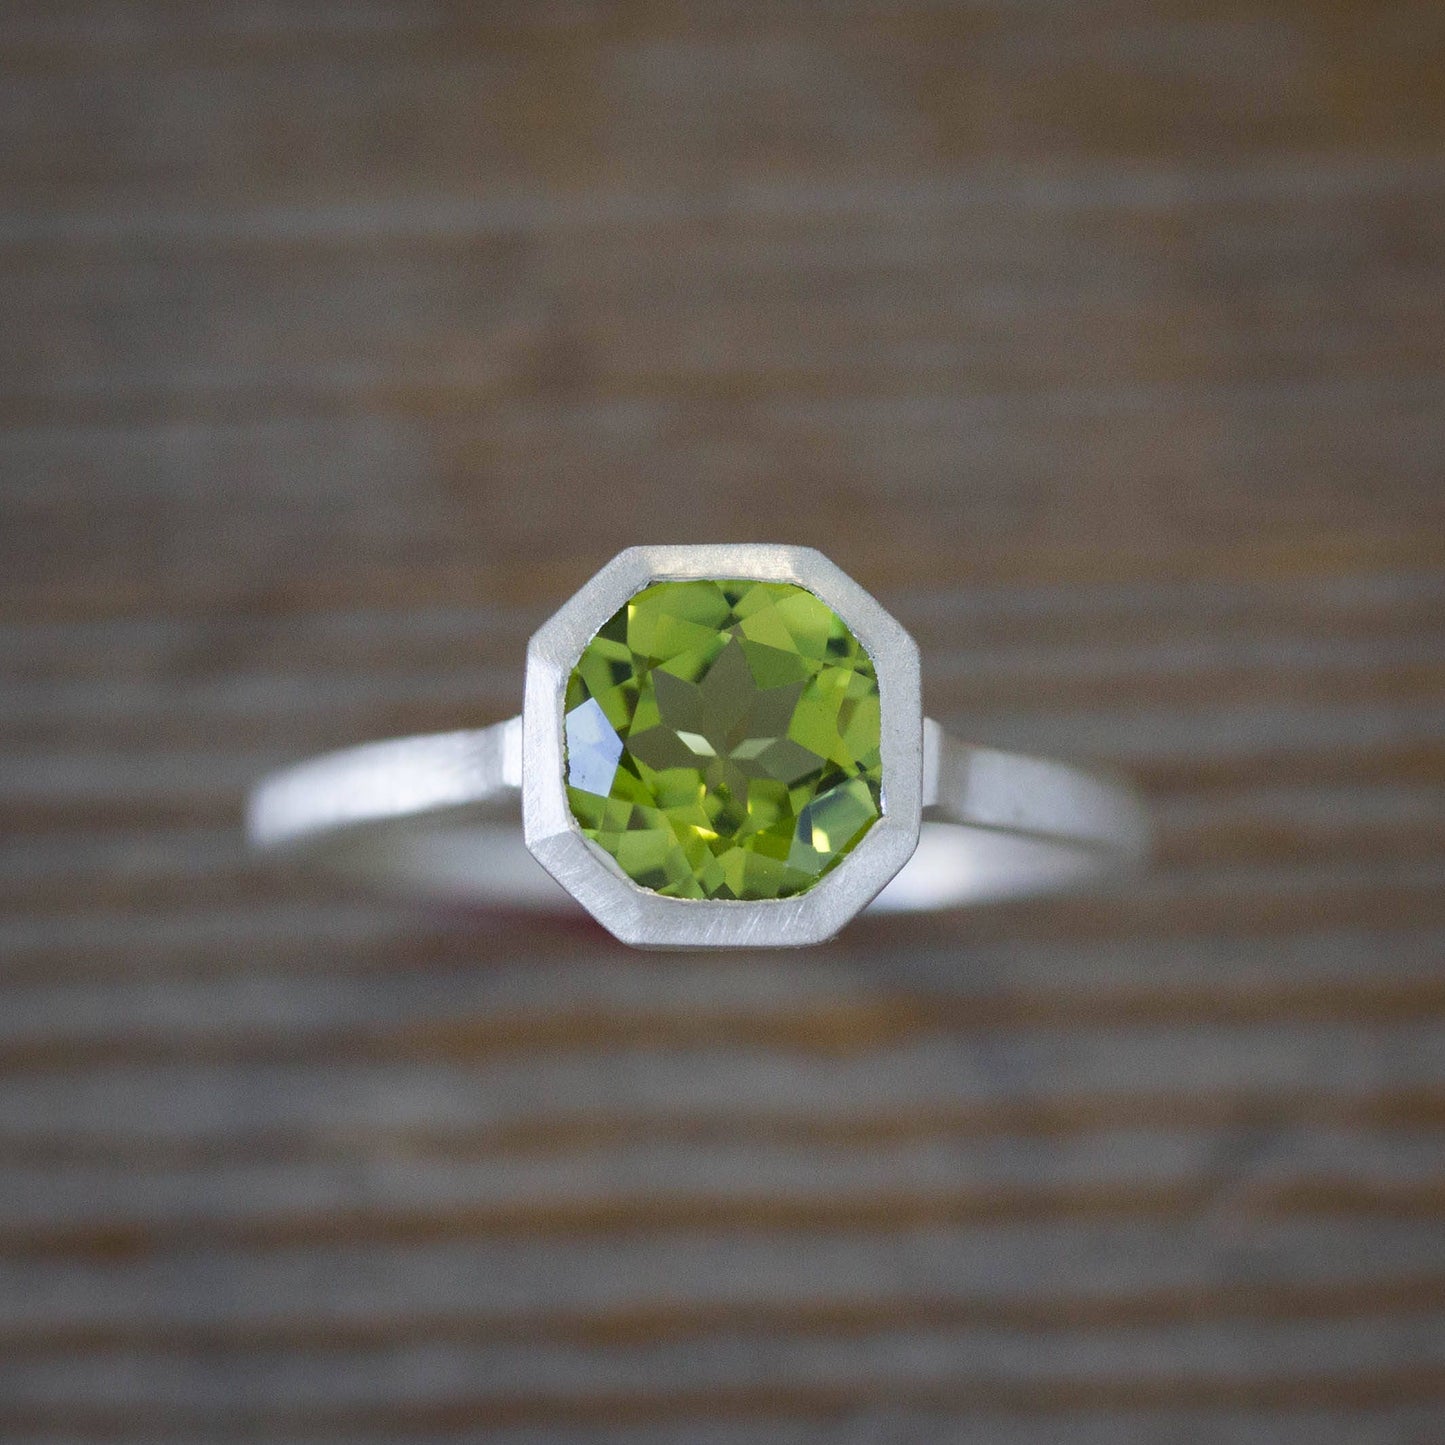 An octagonal Peridot Ring in August Birthstone on a wooden table from Cassin Jewelry.